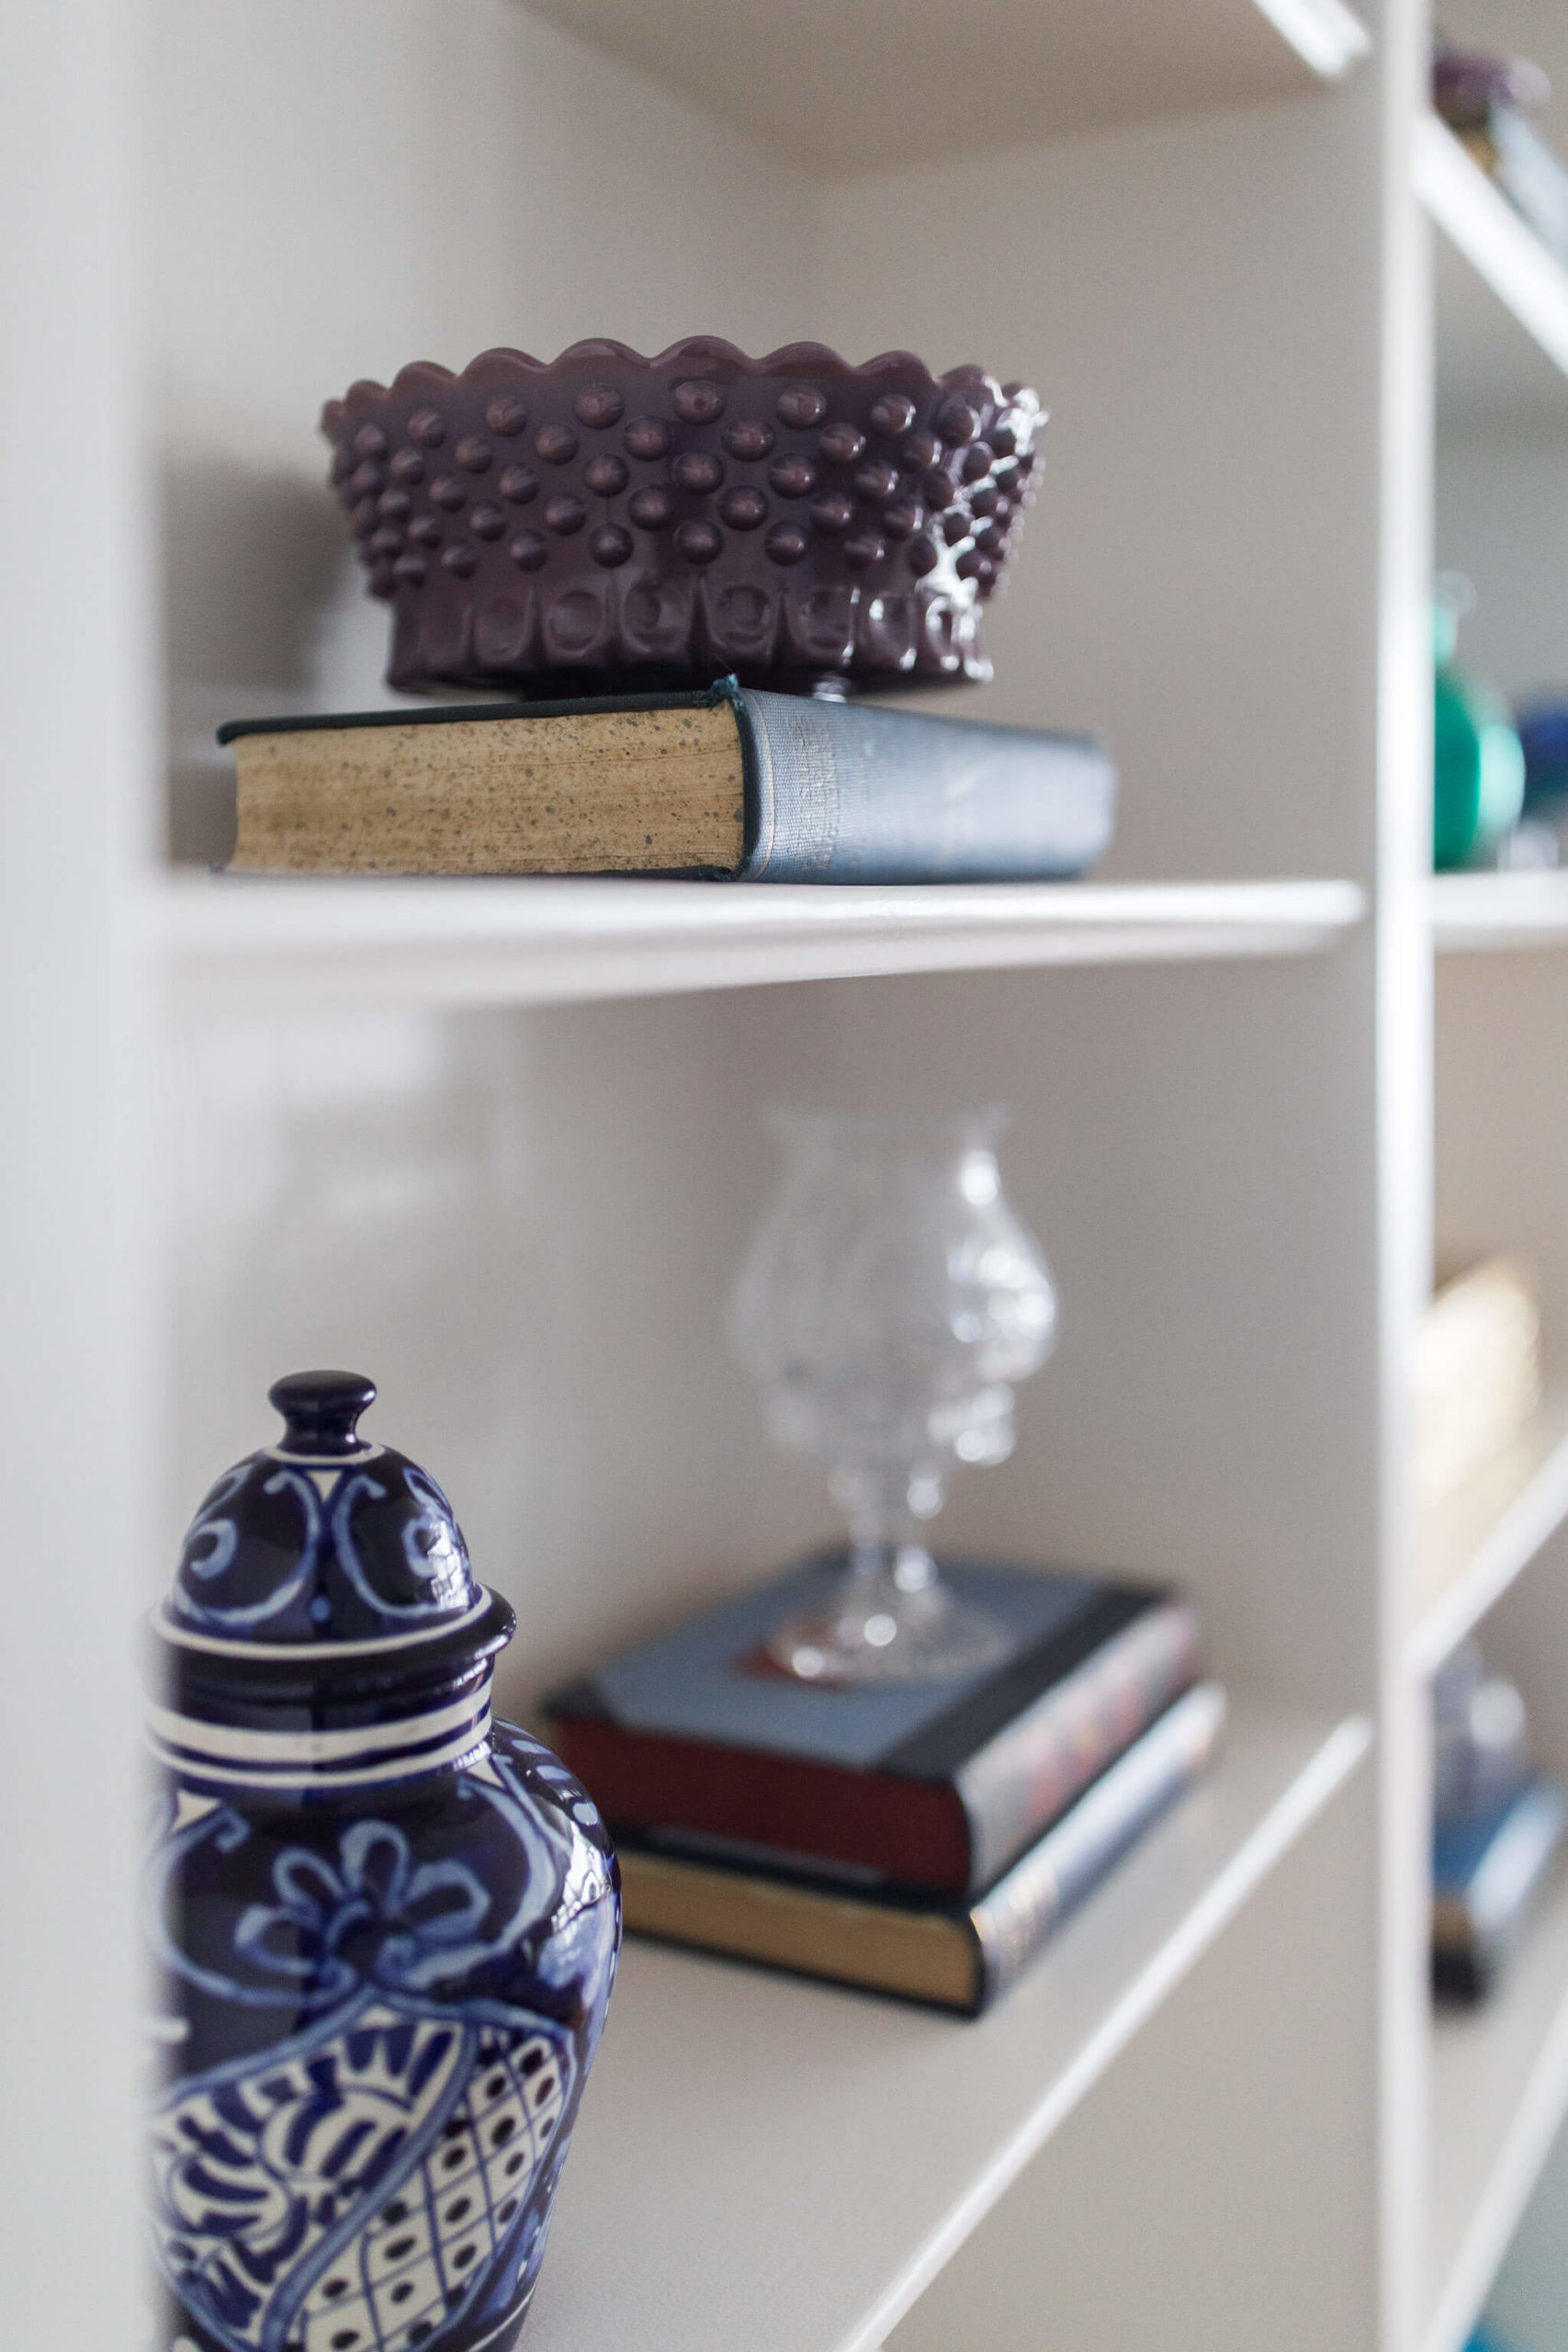 Family Room Built-in Shelves After Lindsey Putzier Design Studio with accessories like purple hobnail glassware